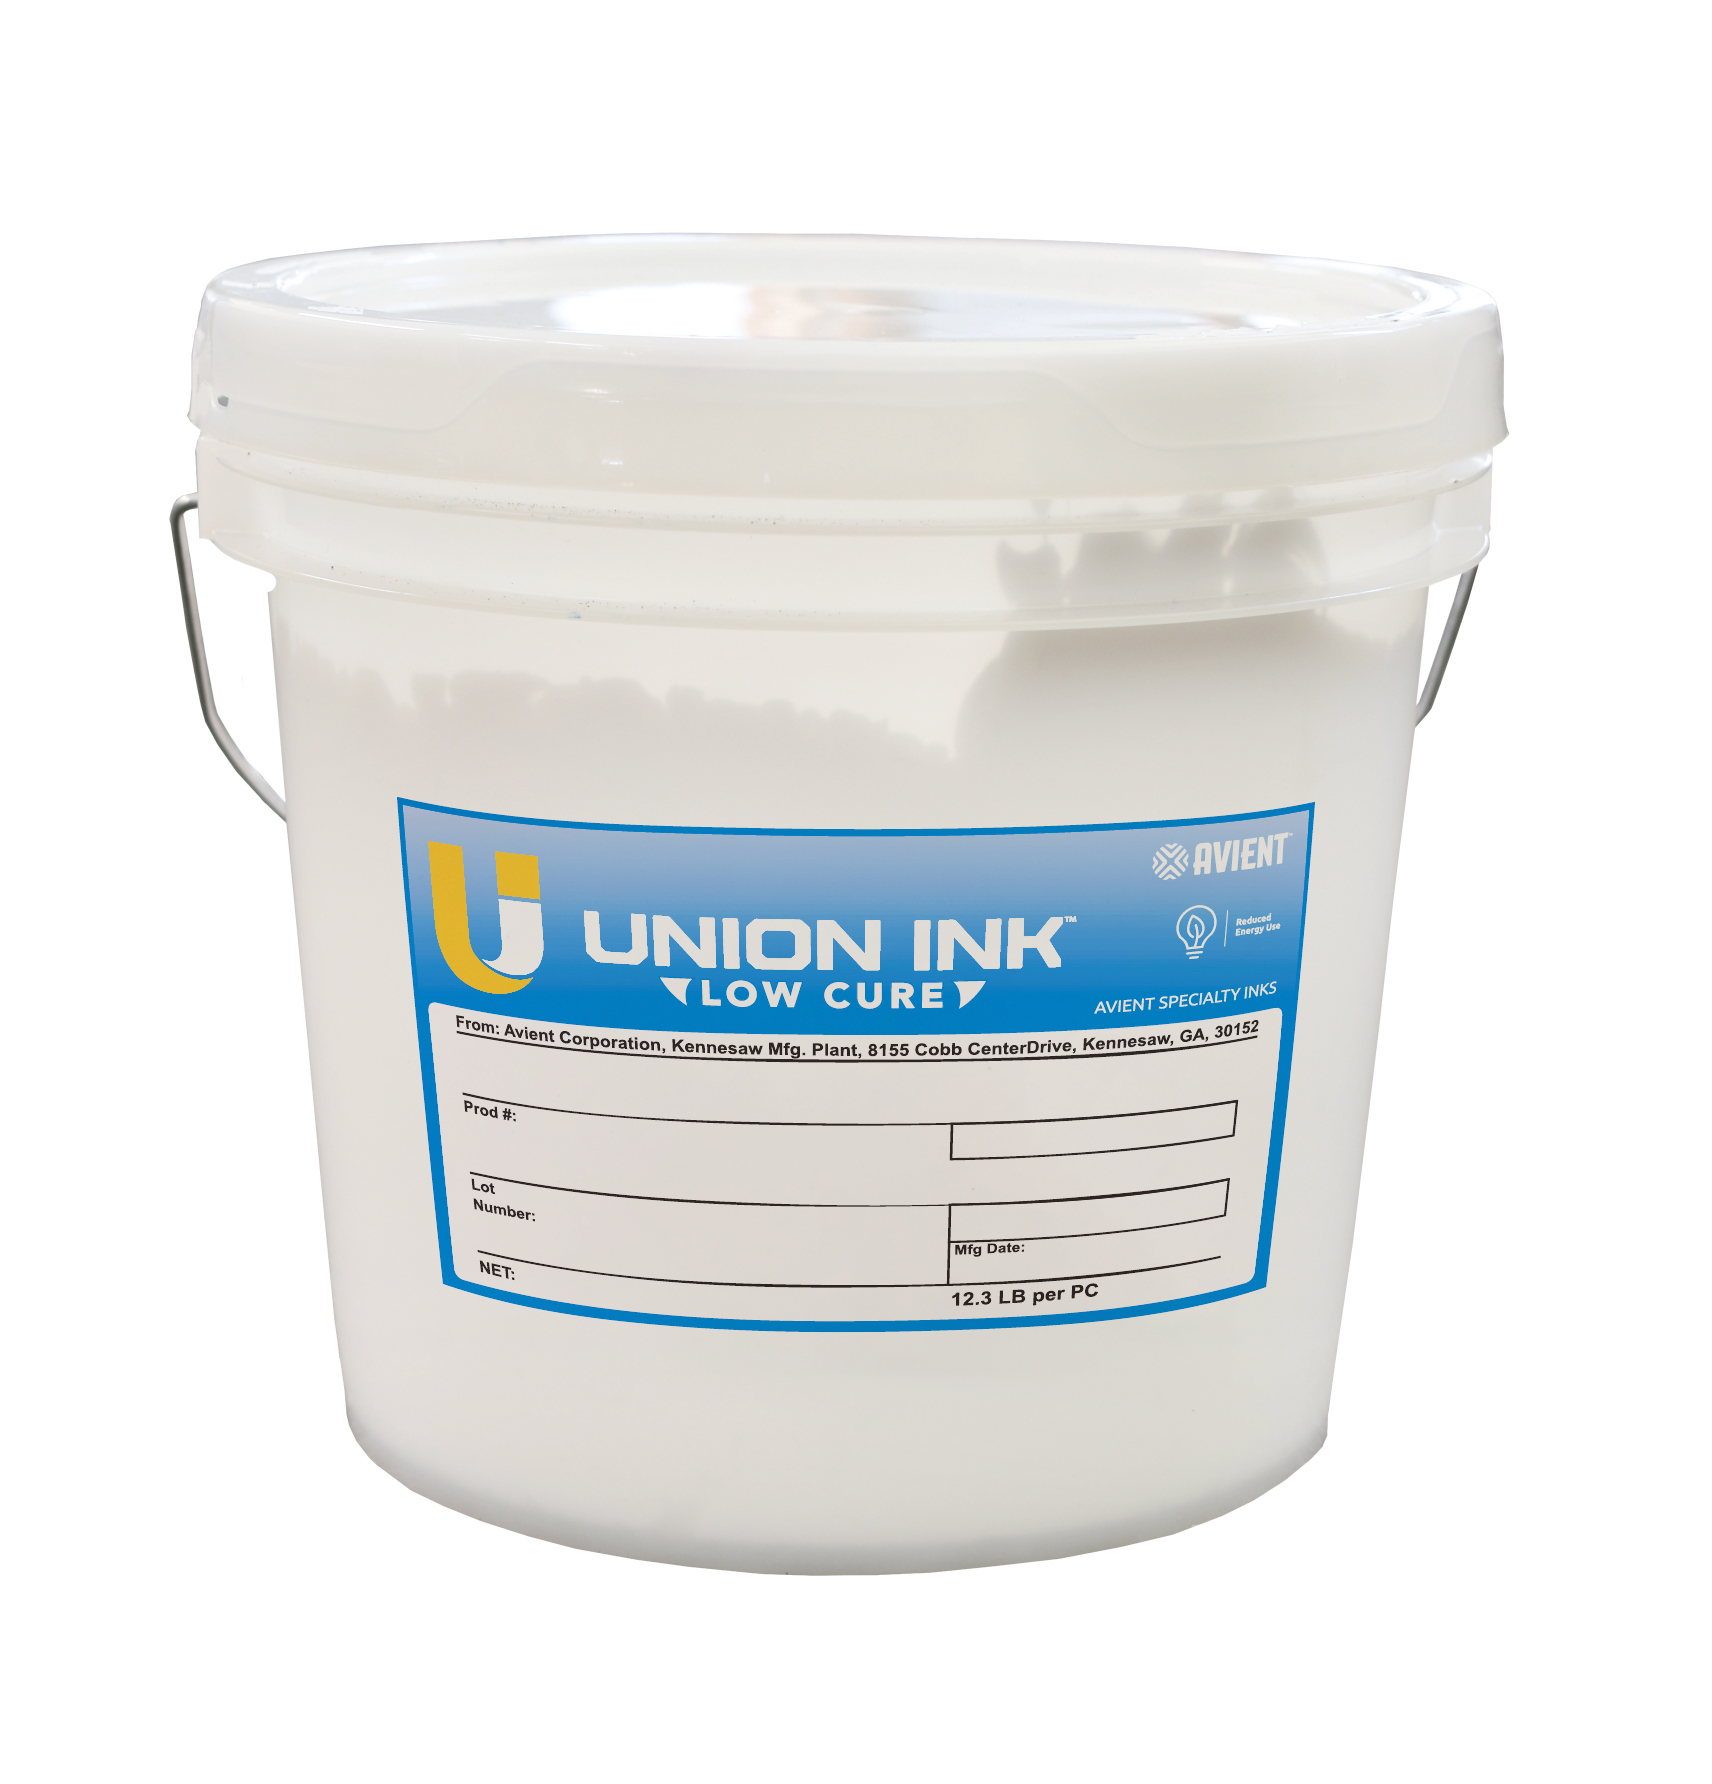 Union Ink™ UPLC1076 Sport LC Frosty Poly-White is high-opacity, low bleed white ink with a soft finish, excellent coverage, great fiber mat-down, and dye blocking abilities for a wide range of fabrics. UPLC1076 utilizes Unions Ink's innovative low cure technology to cure prints as low as 250° F (121° C)